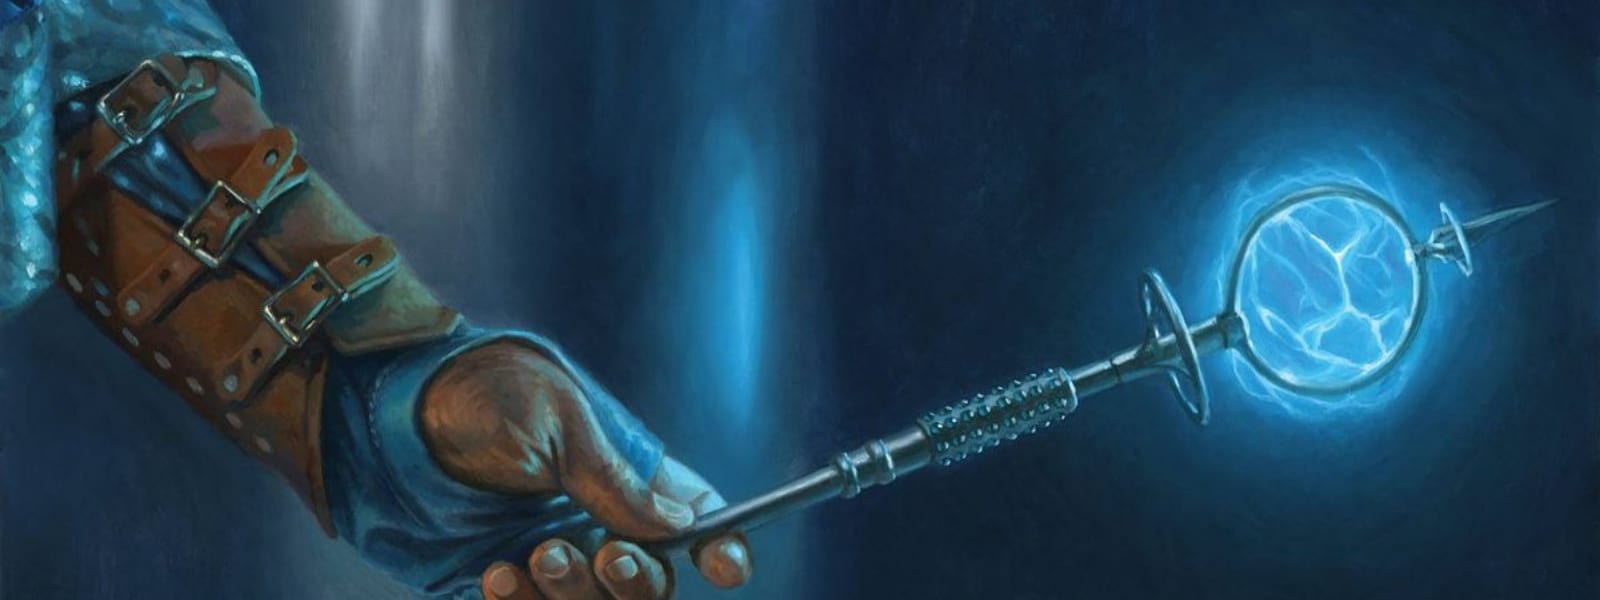 Sorcerer’s Wand - Wands and Staffs in 5e